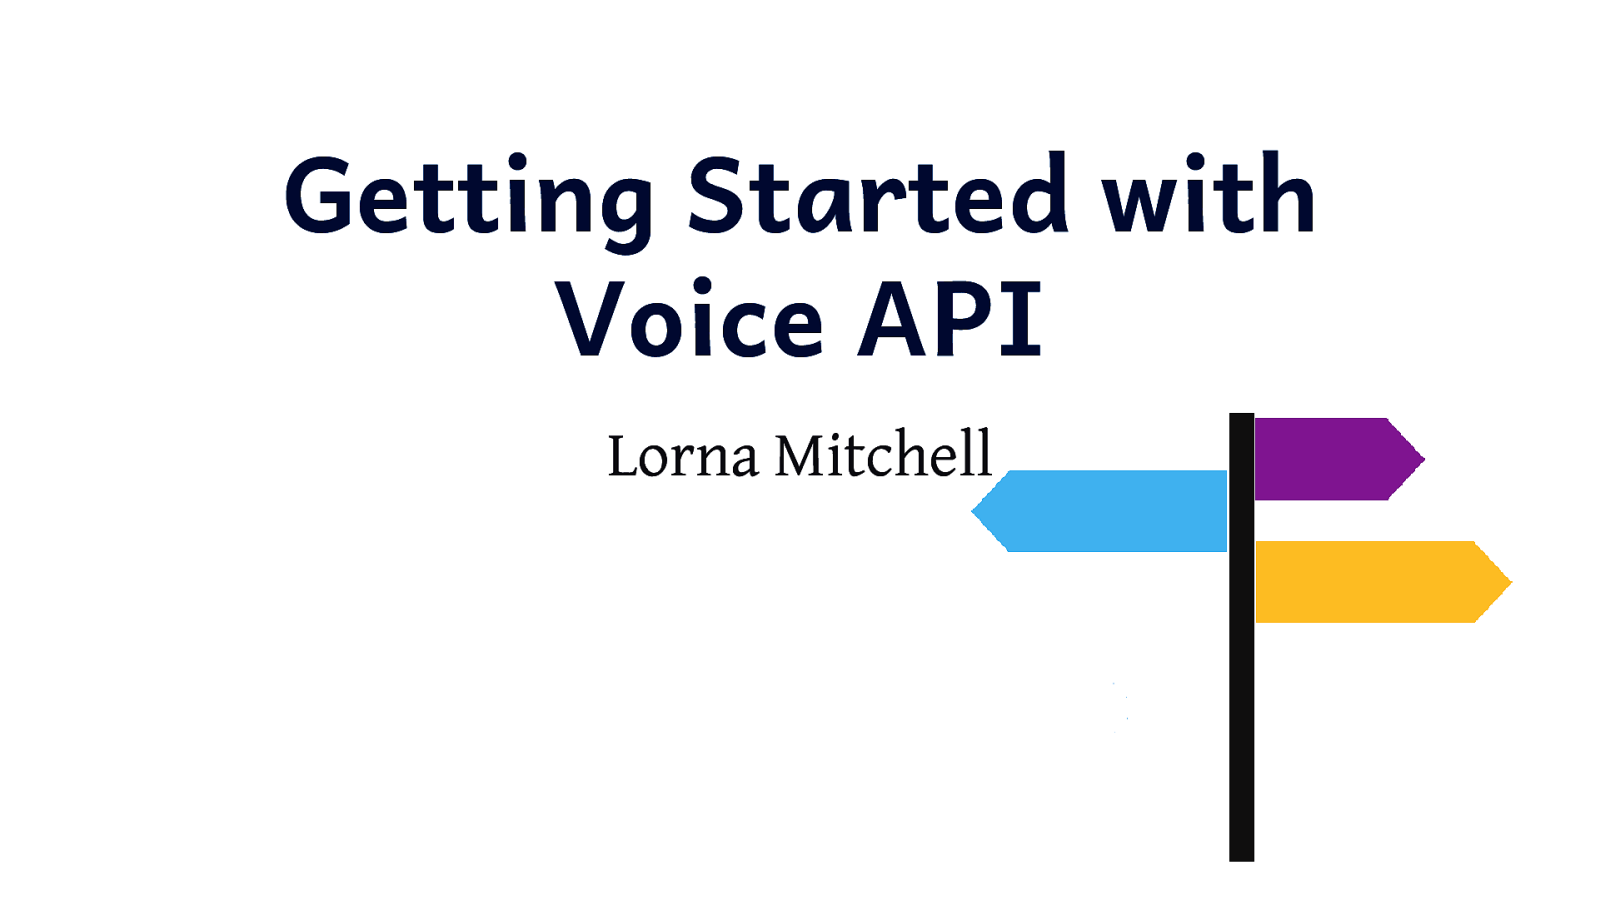 Getting Started with Voice API